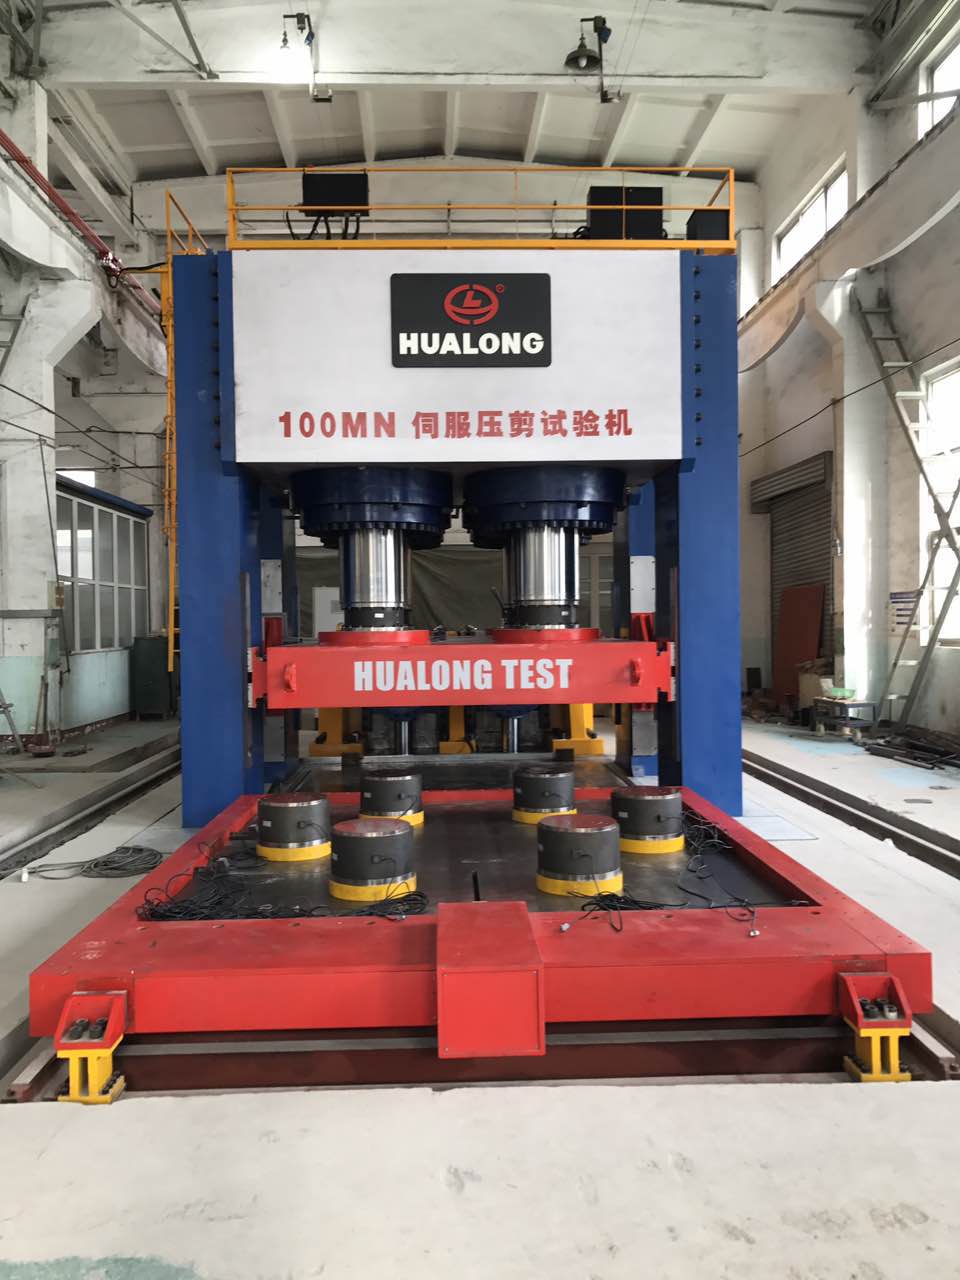 100MN Compression & Shearing Testing Machine Finished Installation and in service